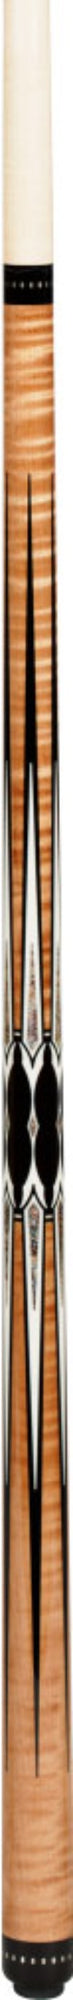 Pechauer PL-23 Limited Edition Pool Cue